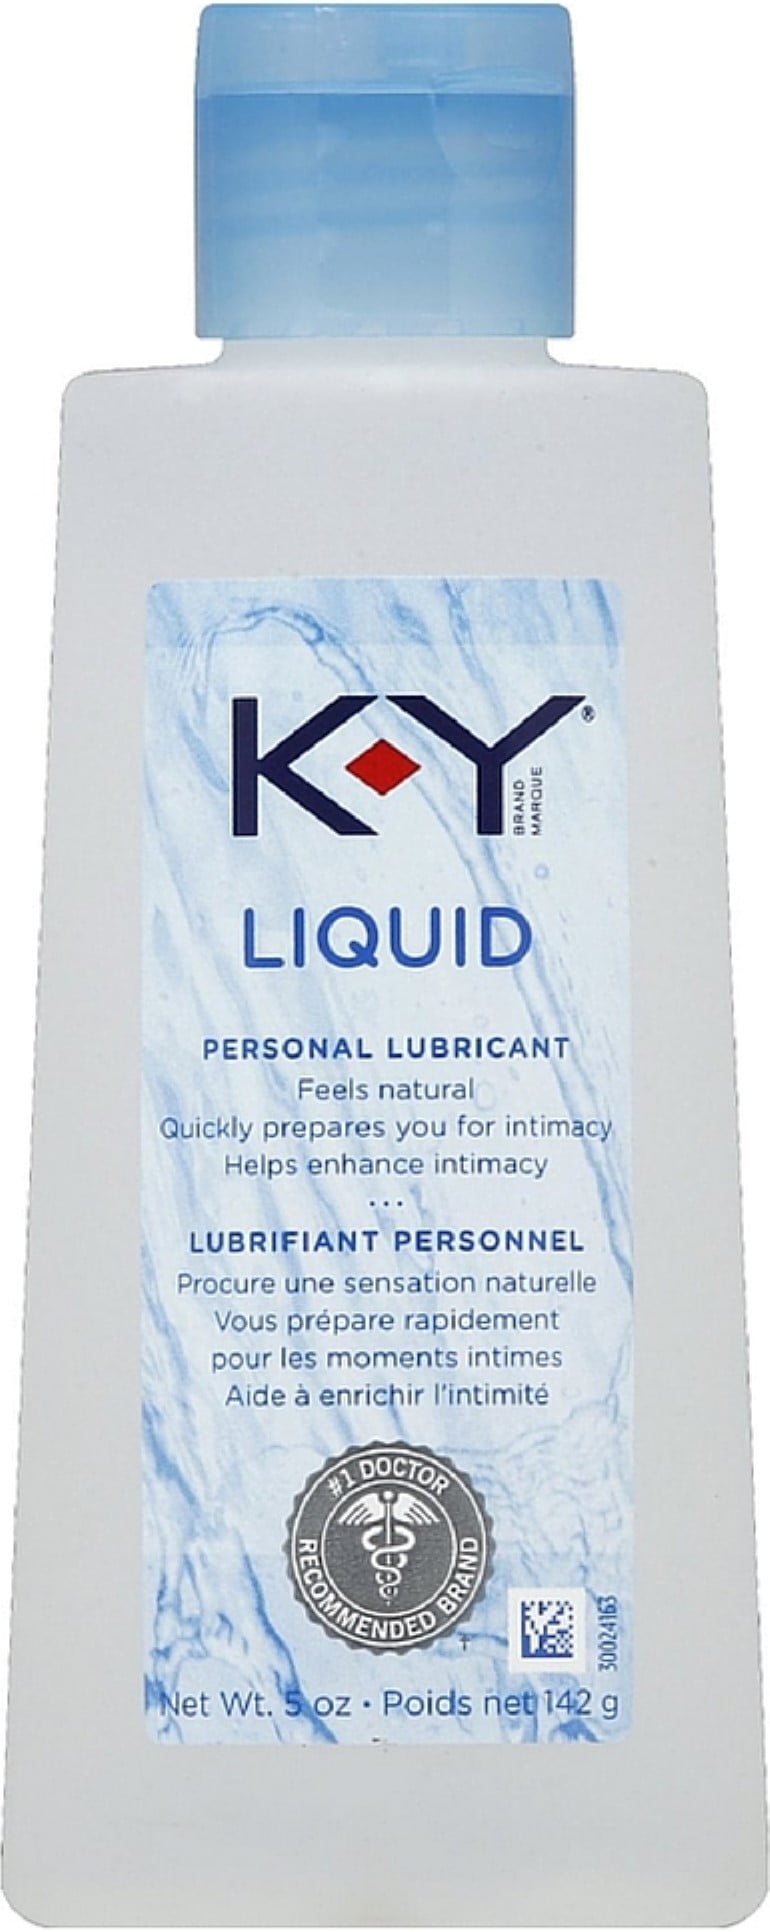 Arrives by Thu, Mar 31 Buy K-Y Liquid Personal Lubricant 5 oz (Pack of 3) a...